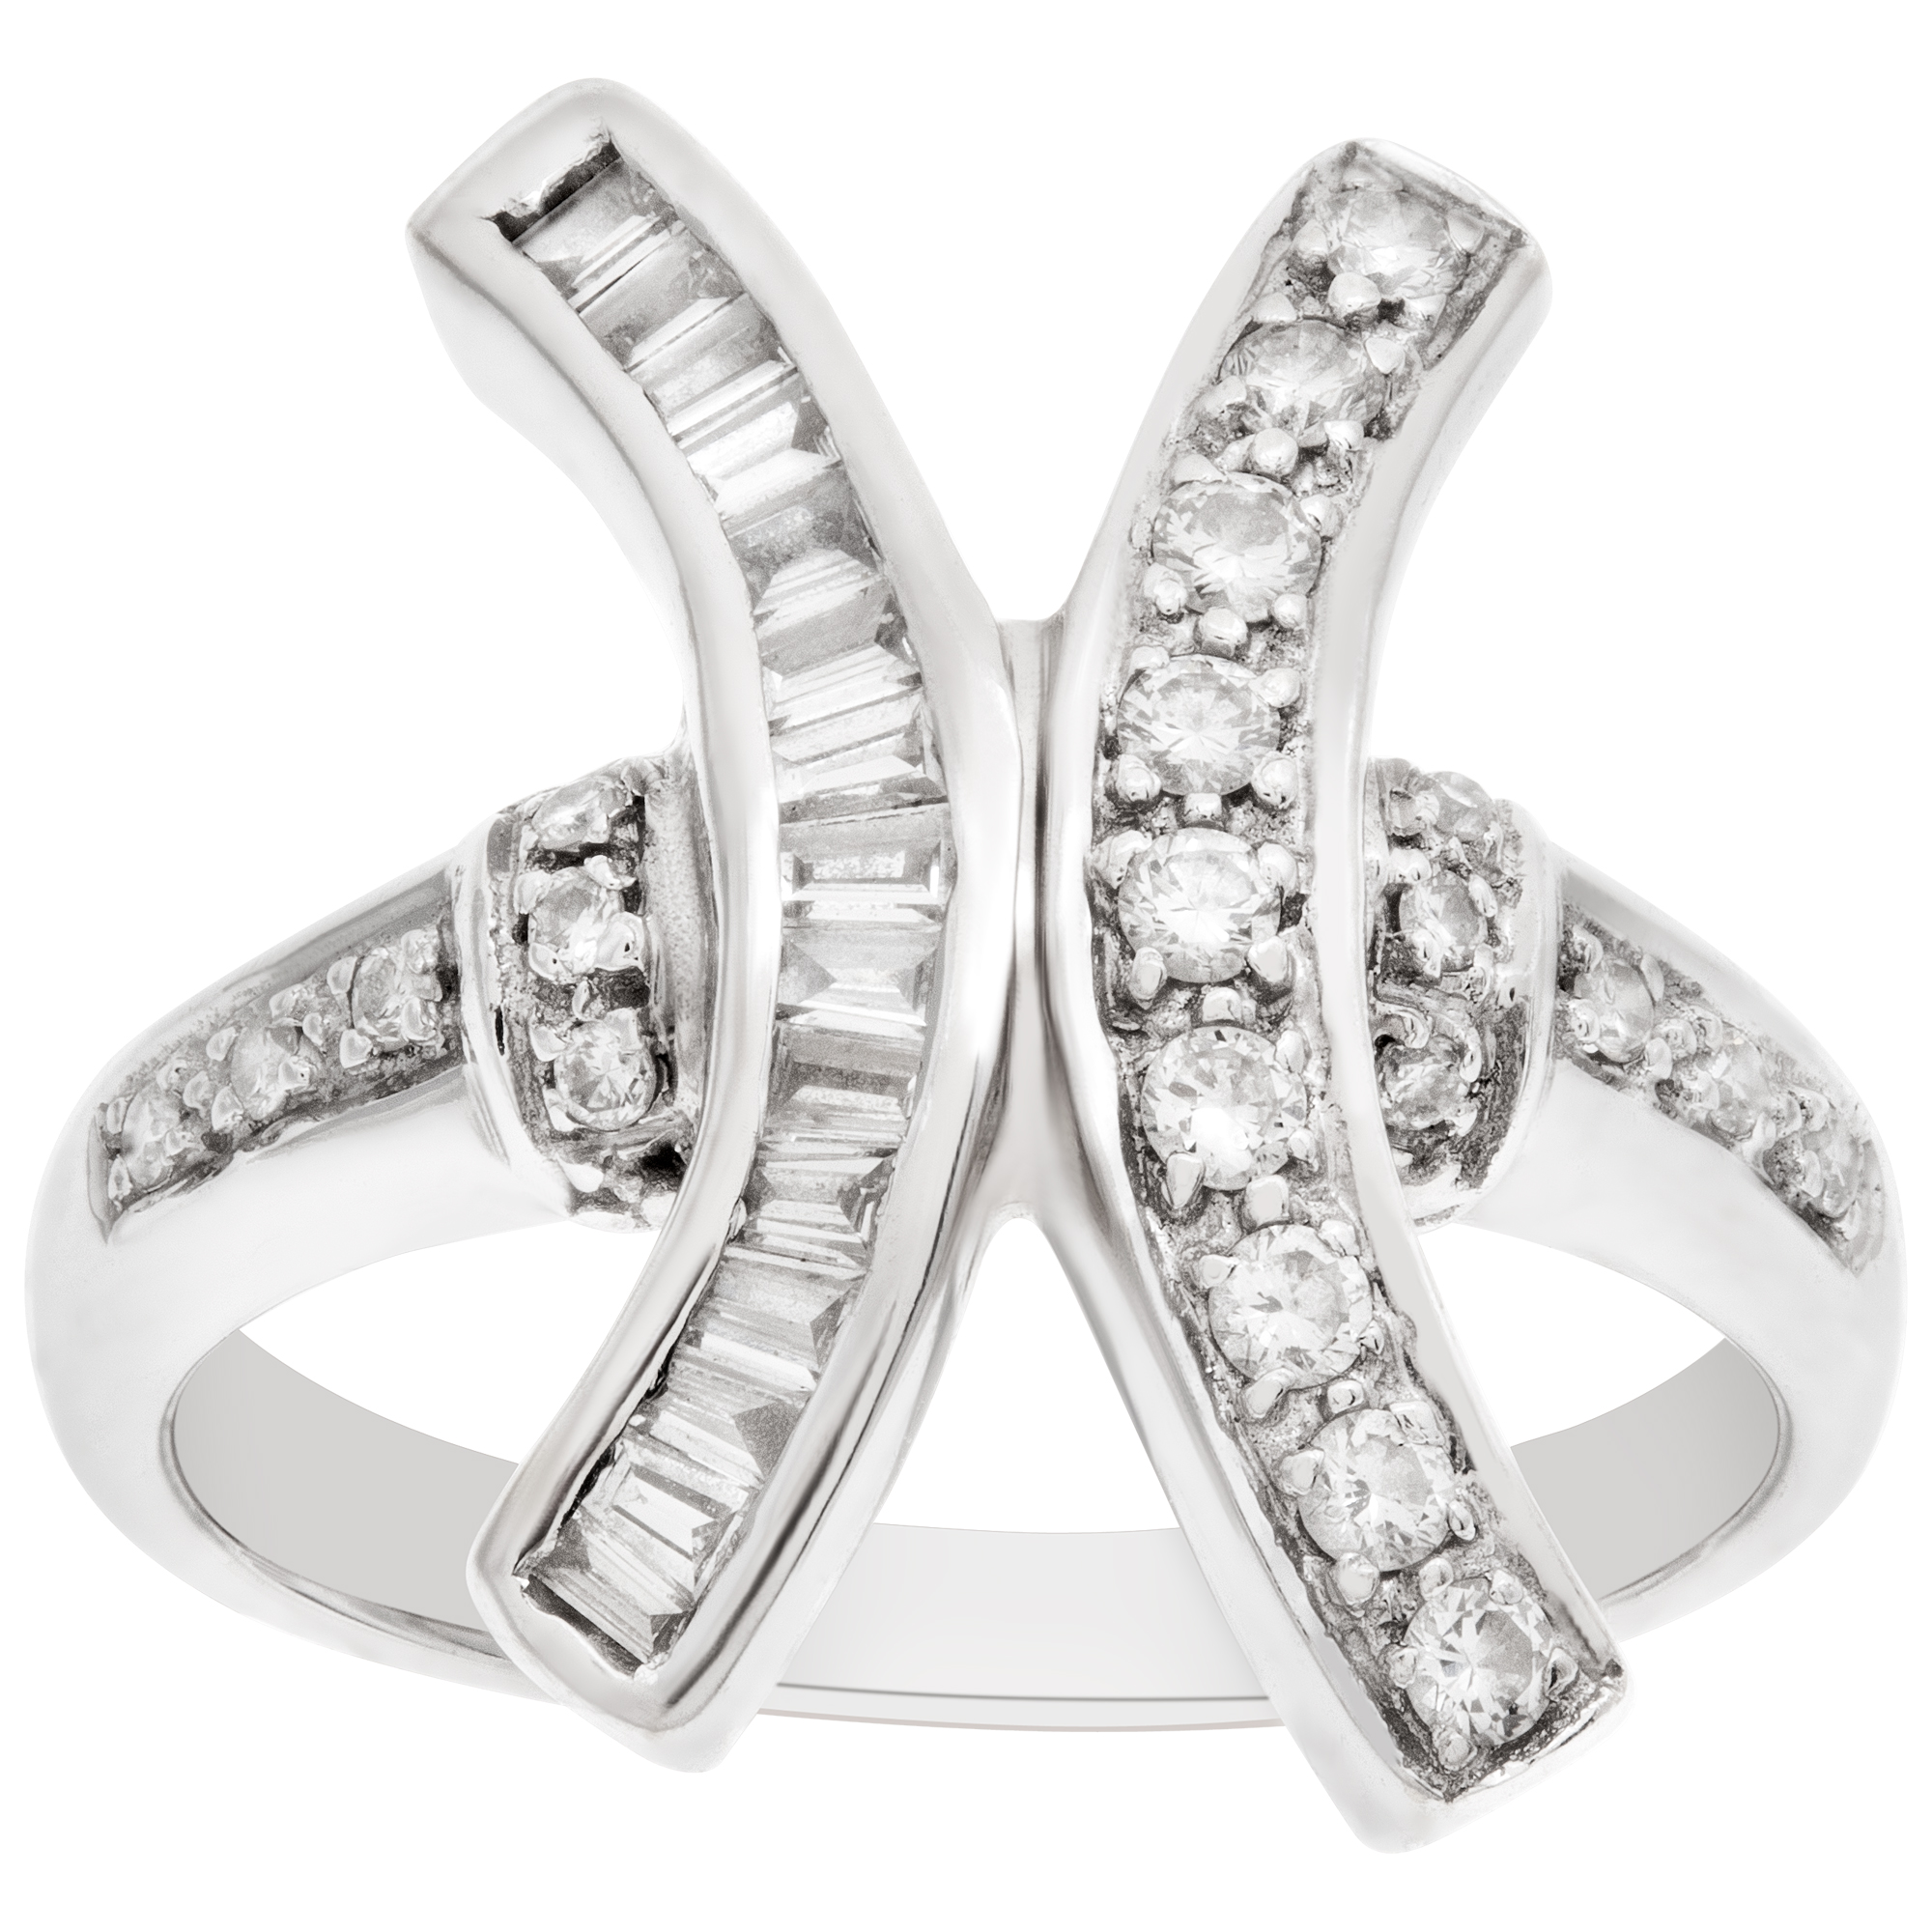 "X" shaped diamond ring in 18k white gold. 0.30 carats in diamonds. size 6 image 1